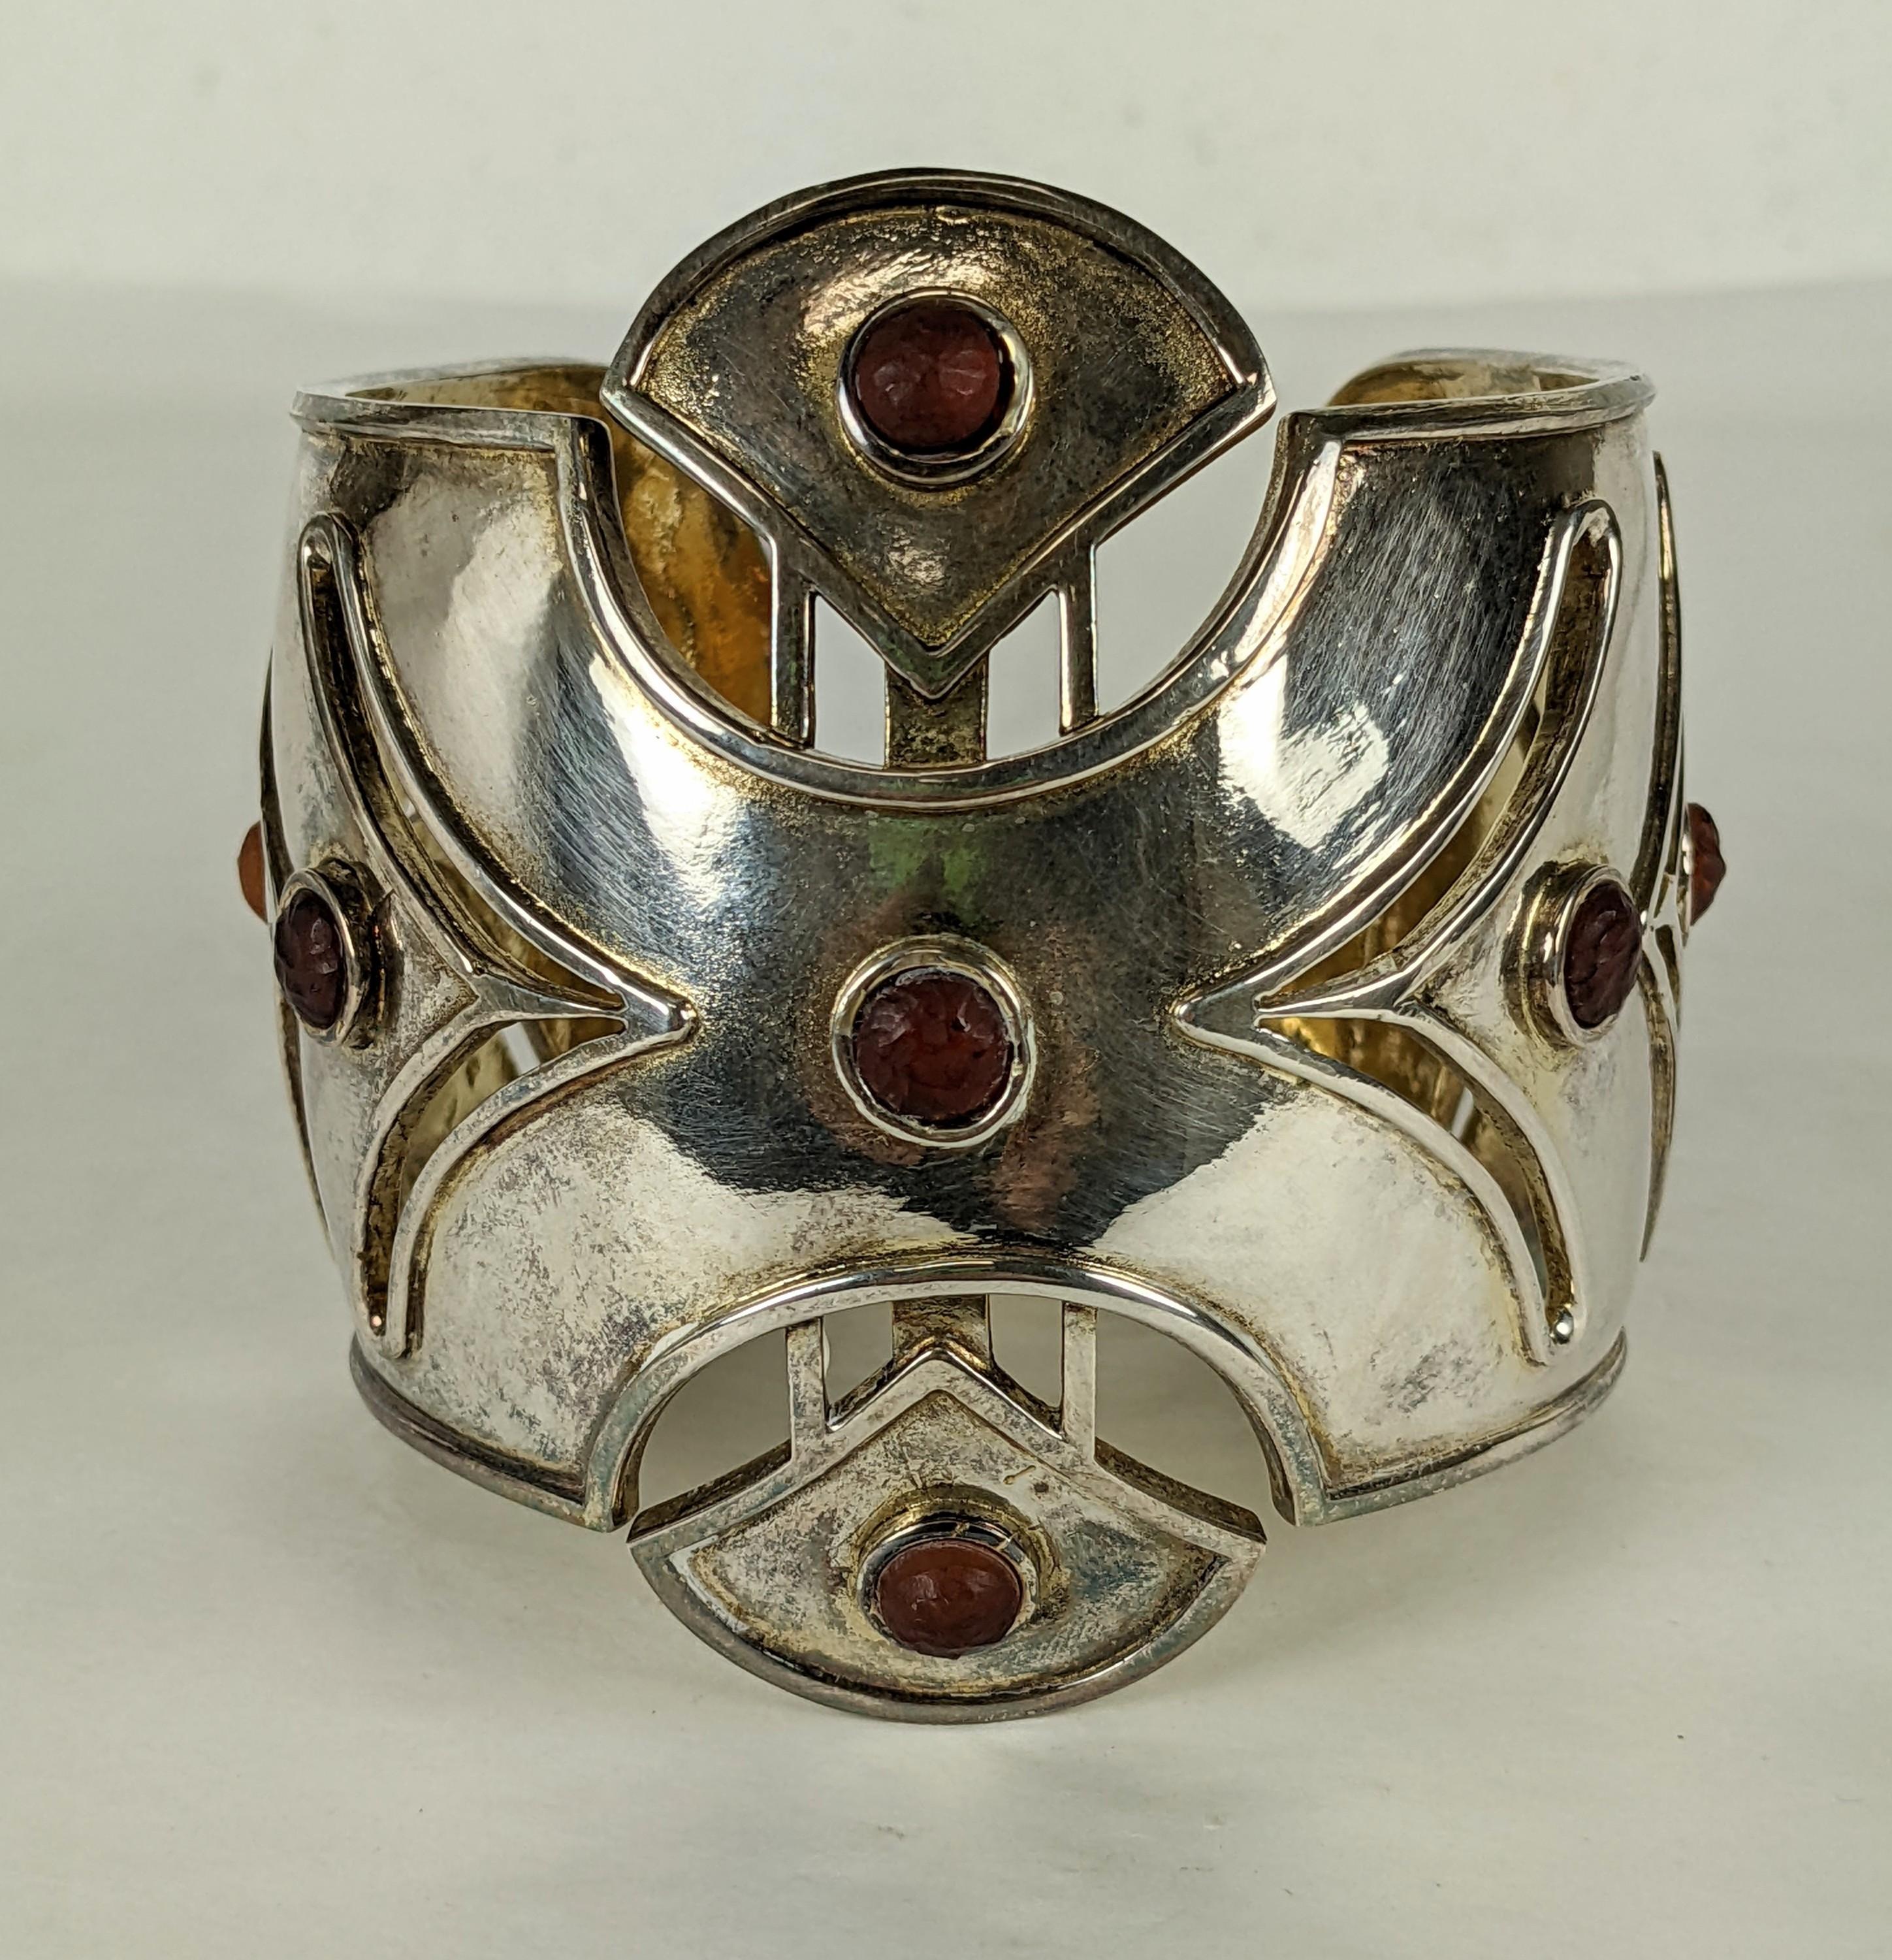 Massive Karl Lagerfeld Weiner Werkstatte cuff in silver toned metal with foiled cabochons in hammered carnelian pate de verre. Huge in scale with arrow cut outs to create Secessionist patterns. 1980's France. Signed 